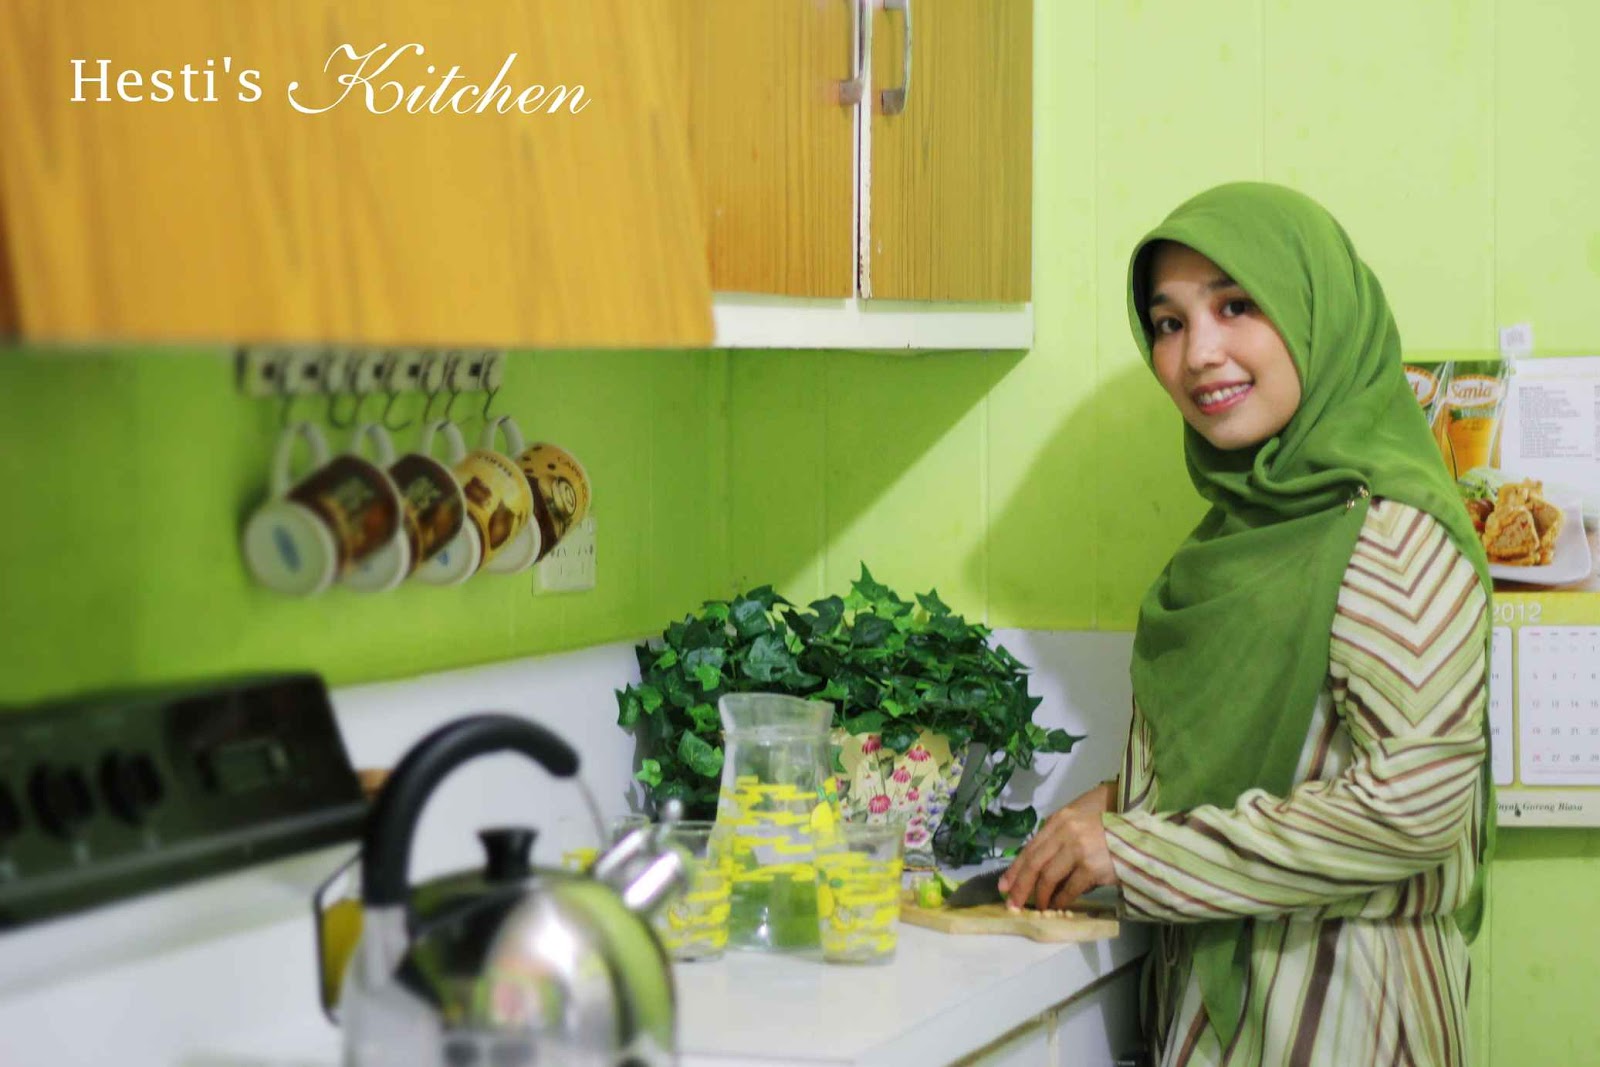   HESTI'S KITCHEN : yummy for your tummy: Behind the Scene